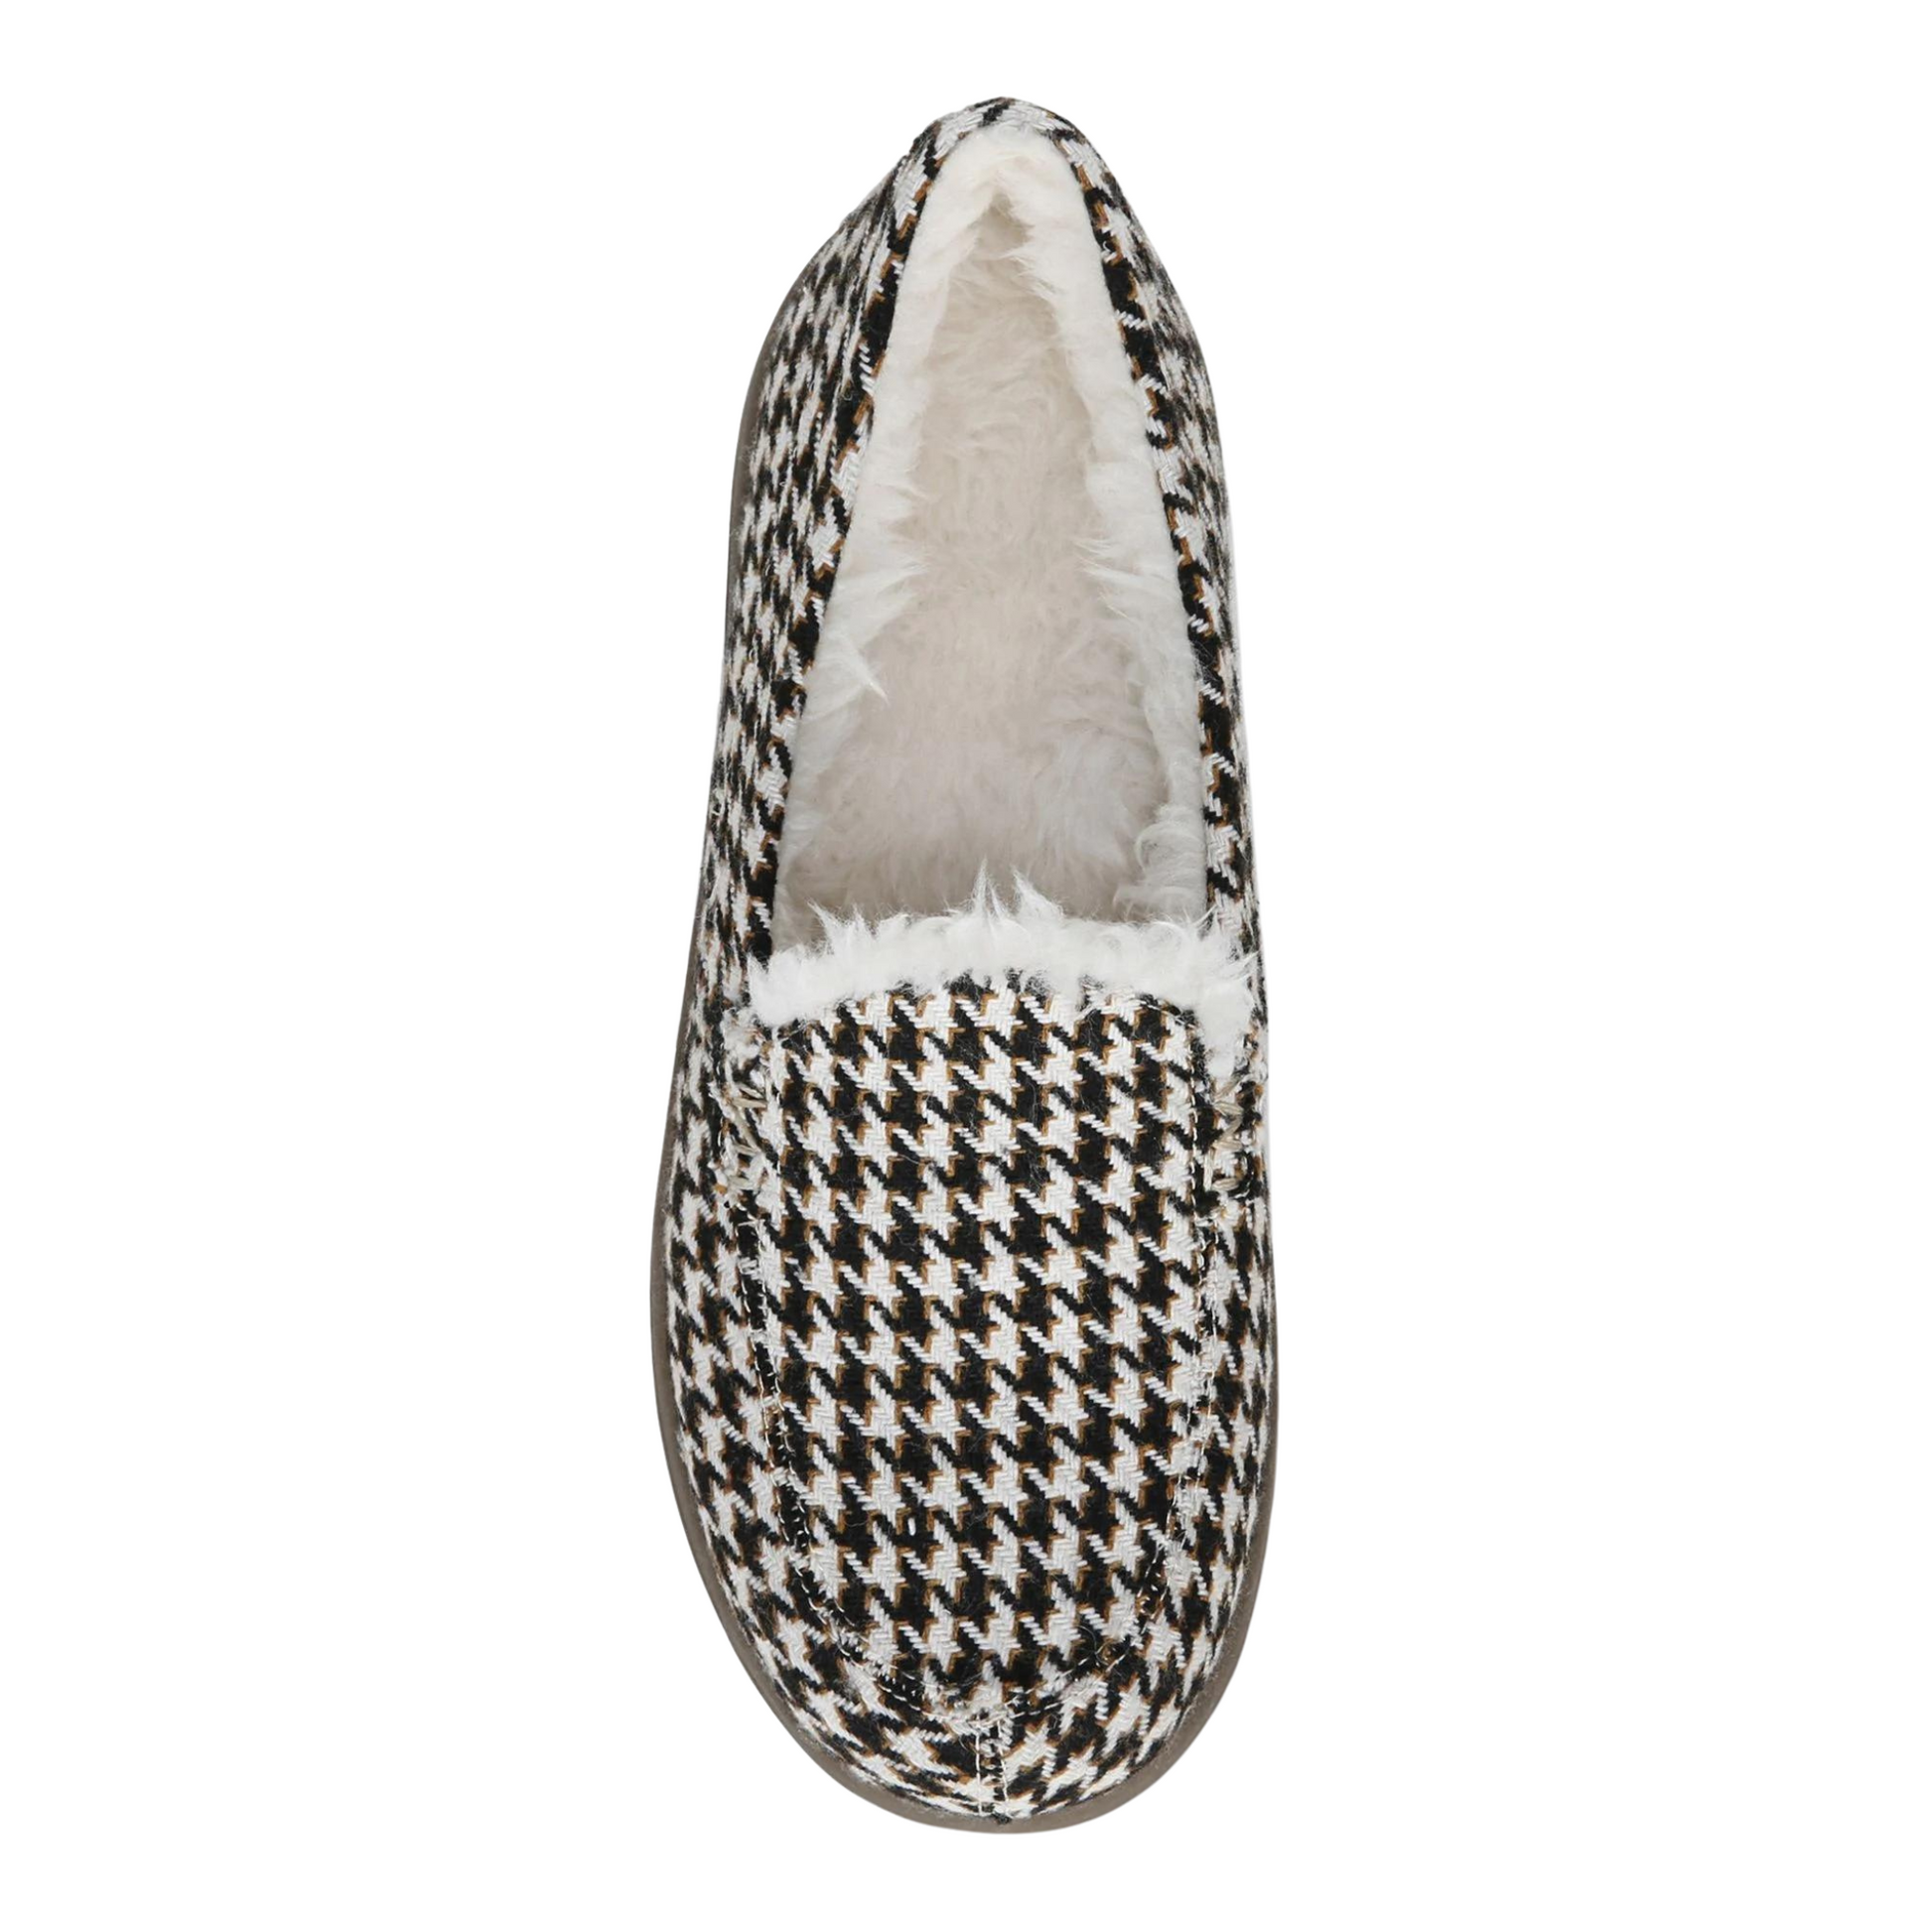 A top view of a slipper with a plush interior and white/brown patterned exterior.